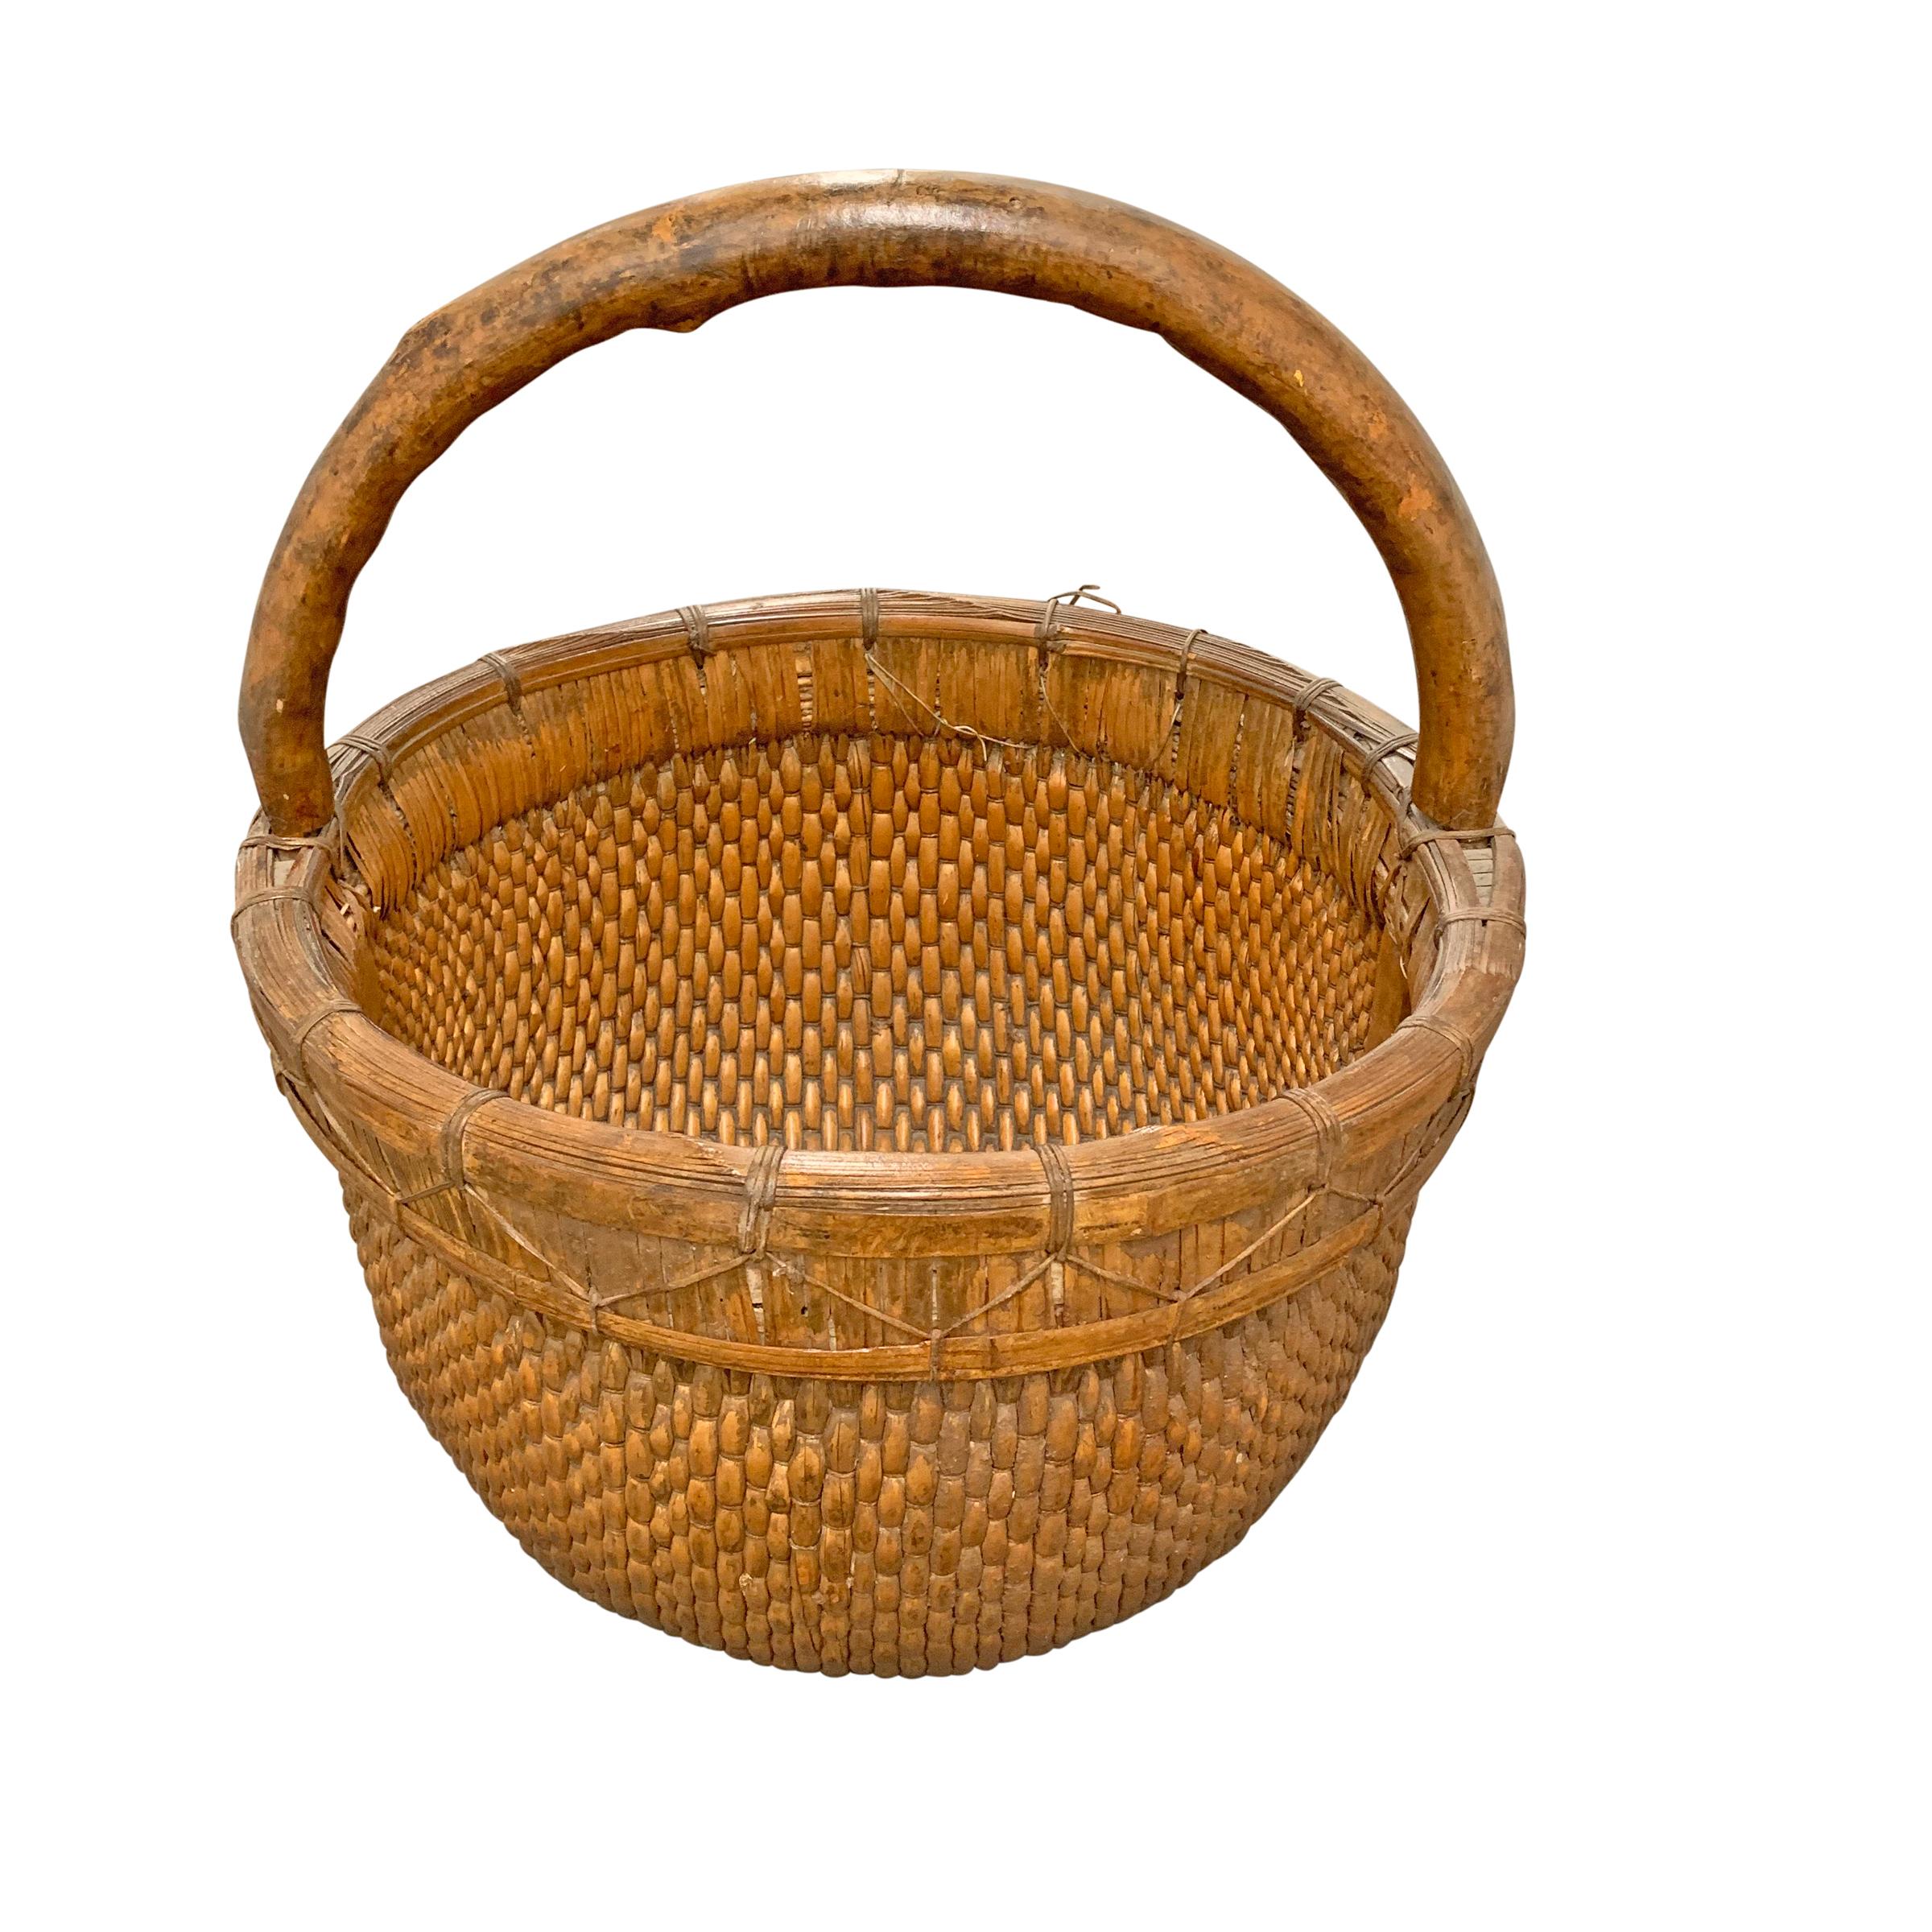 A mid-20th century Chinese woven reed gathering basket with a thick bentwood handle attached to a thick heavy band with woven reed lacing.